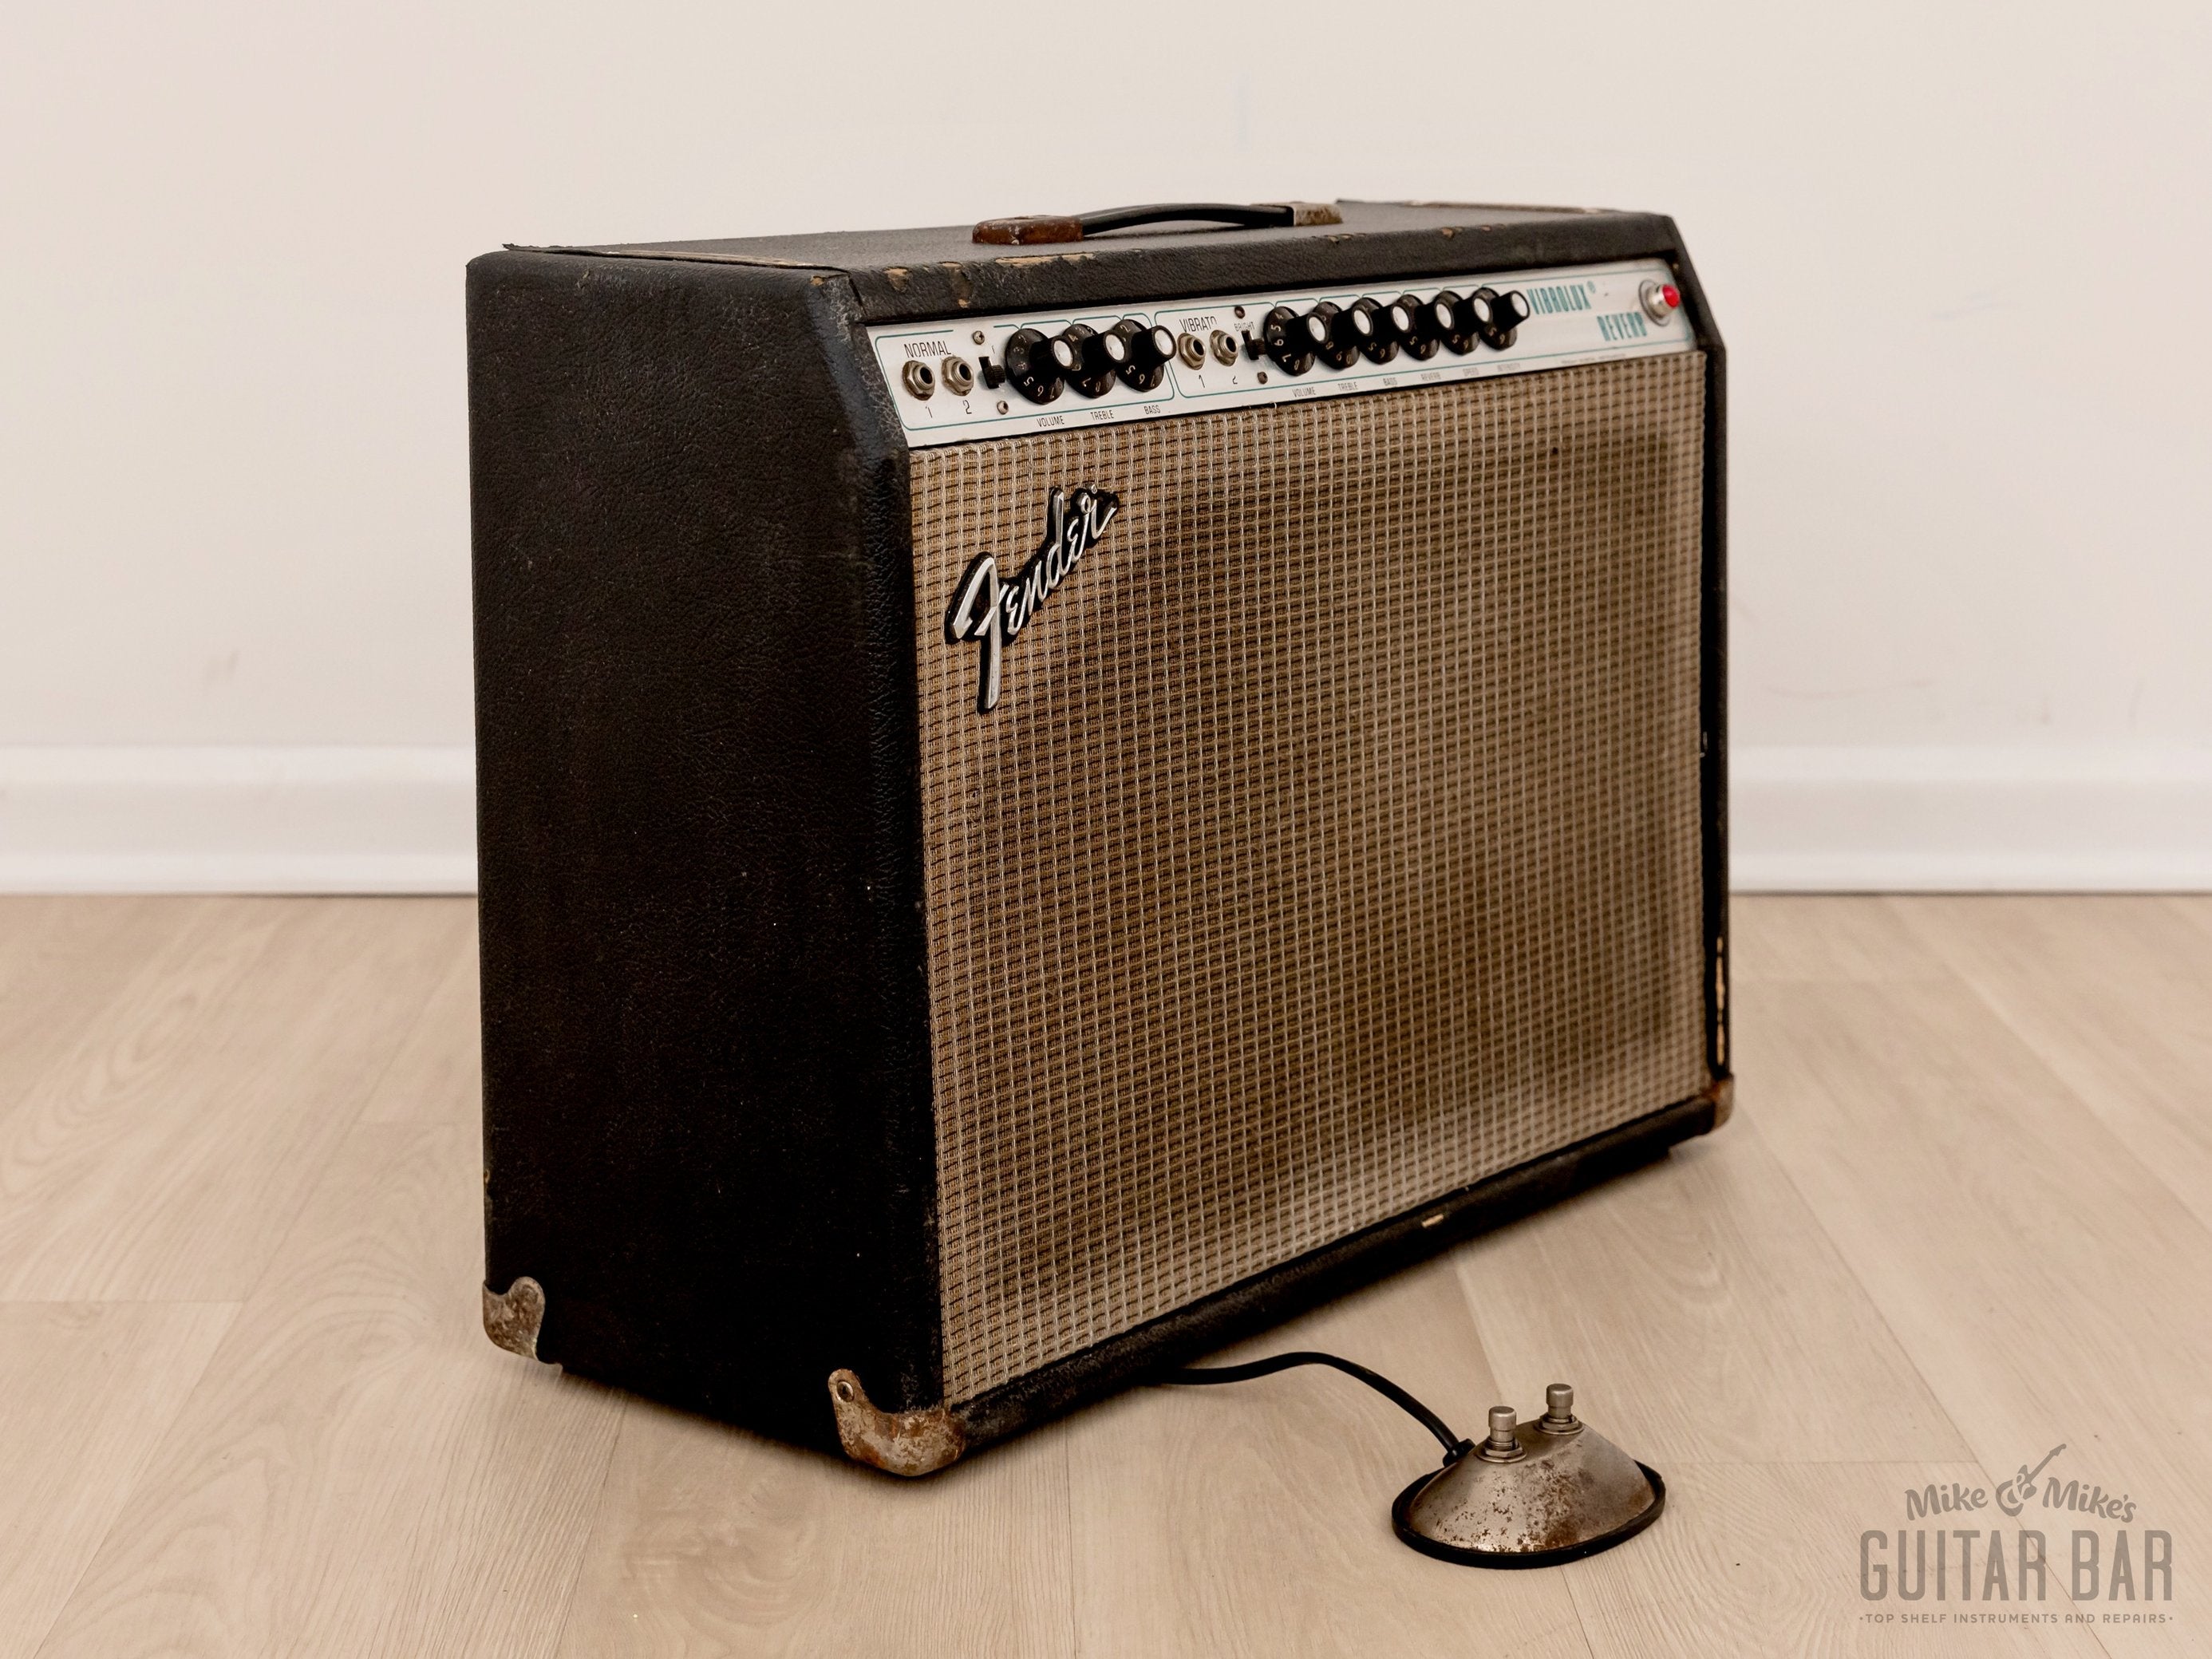 1976 Fender Vibrolux Reverb Silverface Vintage Tube Amp w/ Oxford 10L6 & Footswitch, Serviced